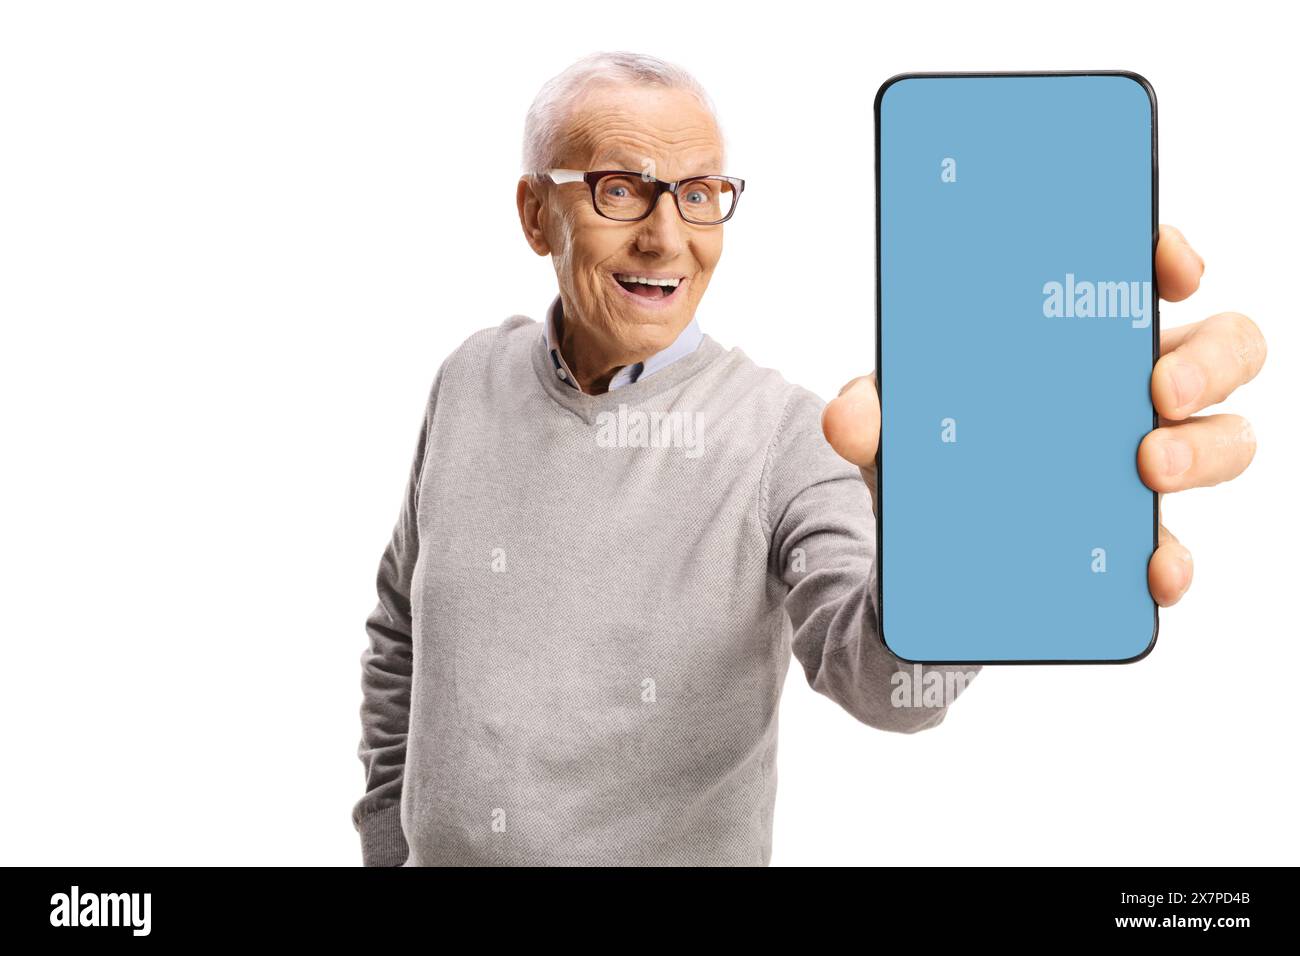 Pensioner holding a smartphone with a blue screen isolated on white background Stock Photo